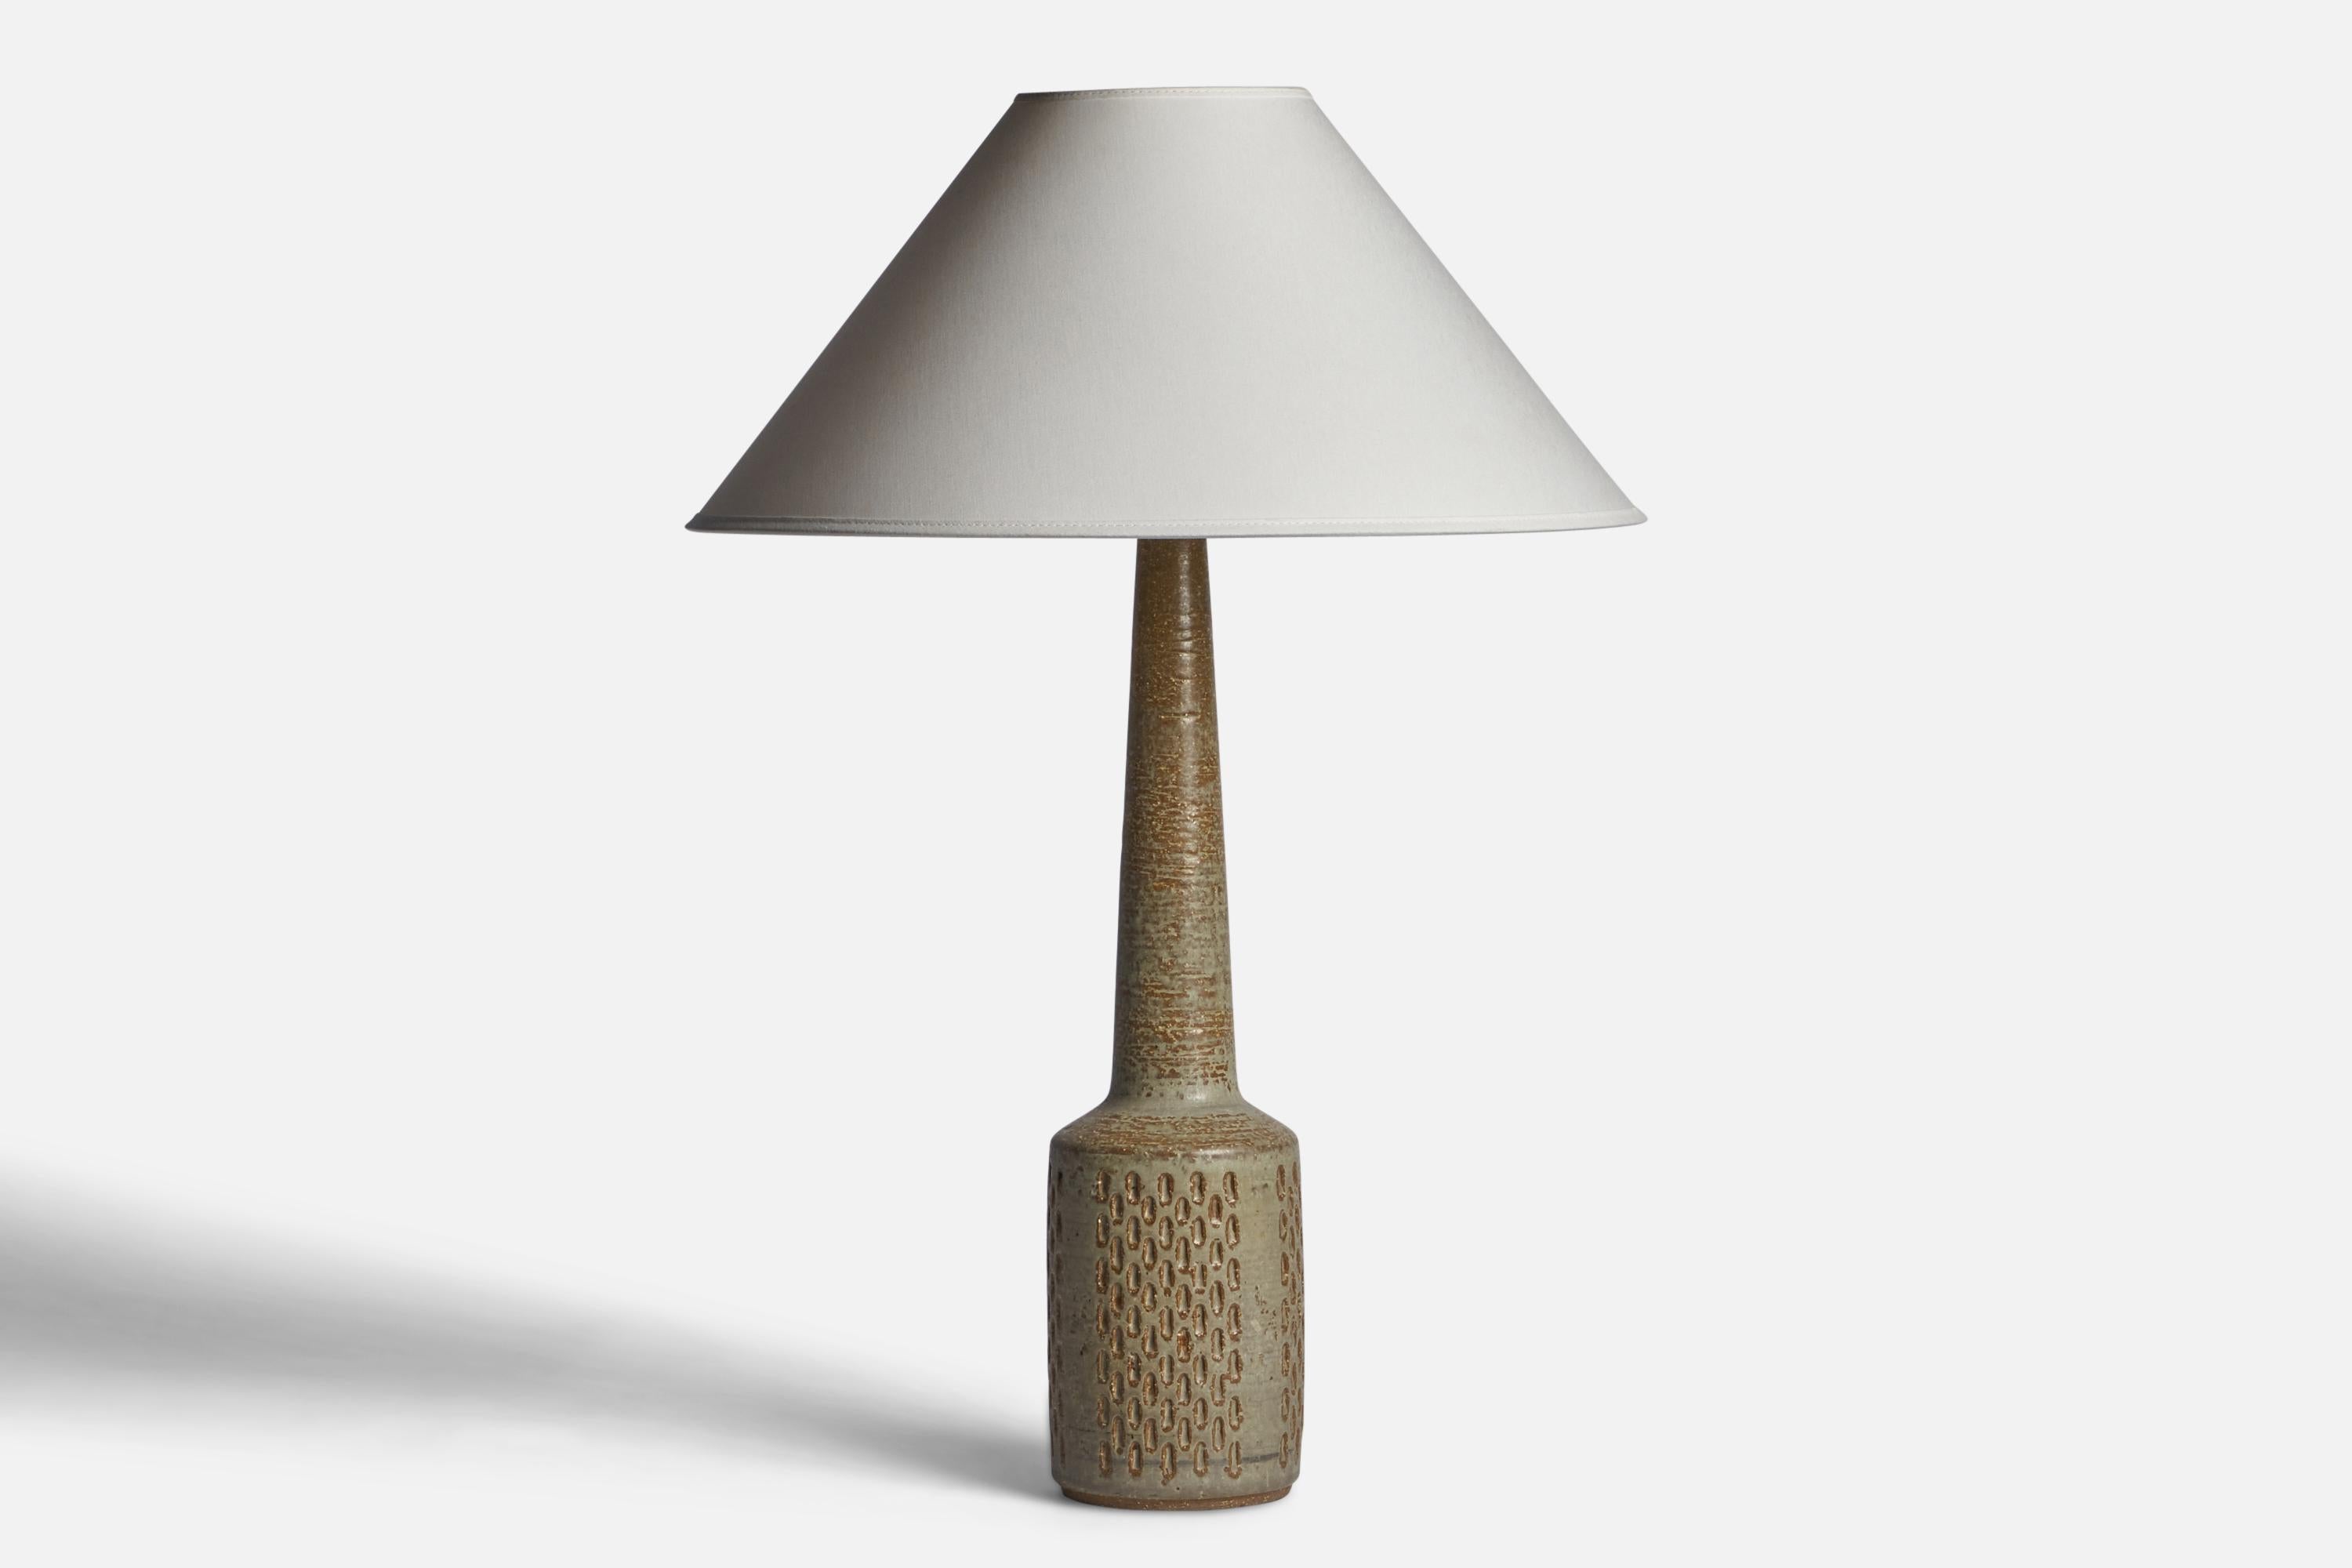 A grey-glazed stoneware table lamp designed by Per & Annelise Linneman-Schmidt and produced by Palshus, Denmark, 1960s.

Dimensions of Lamp (inches): 19.15” H x 4.15” Diameter
Dimensions of Shade (inches): 4.5” Top Diameter x 16” Bottom Diameter x